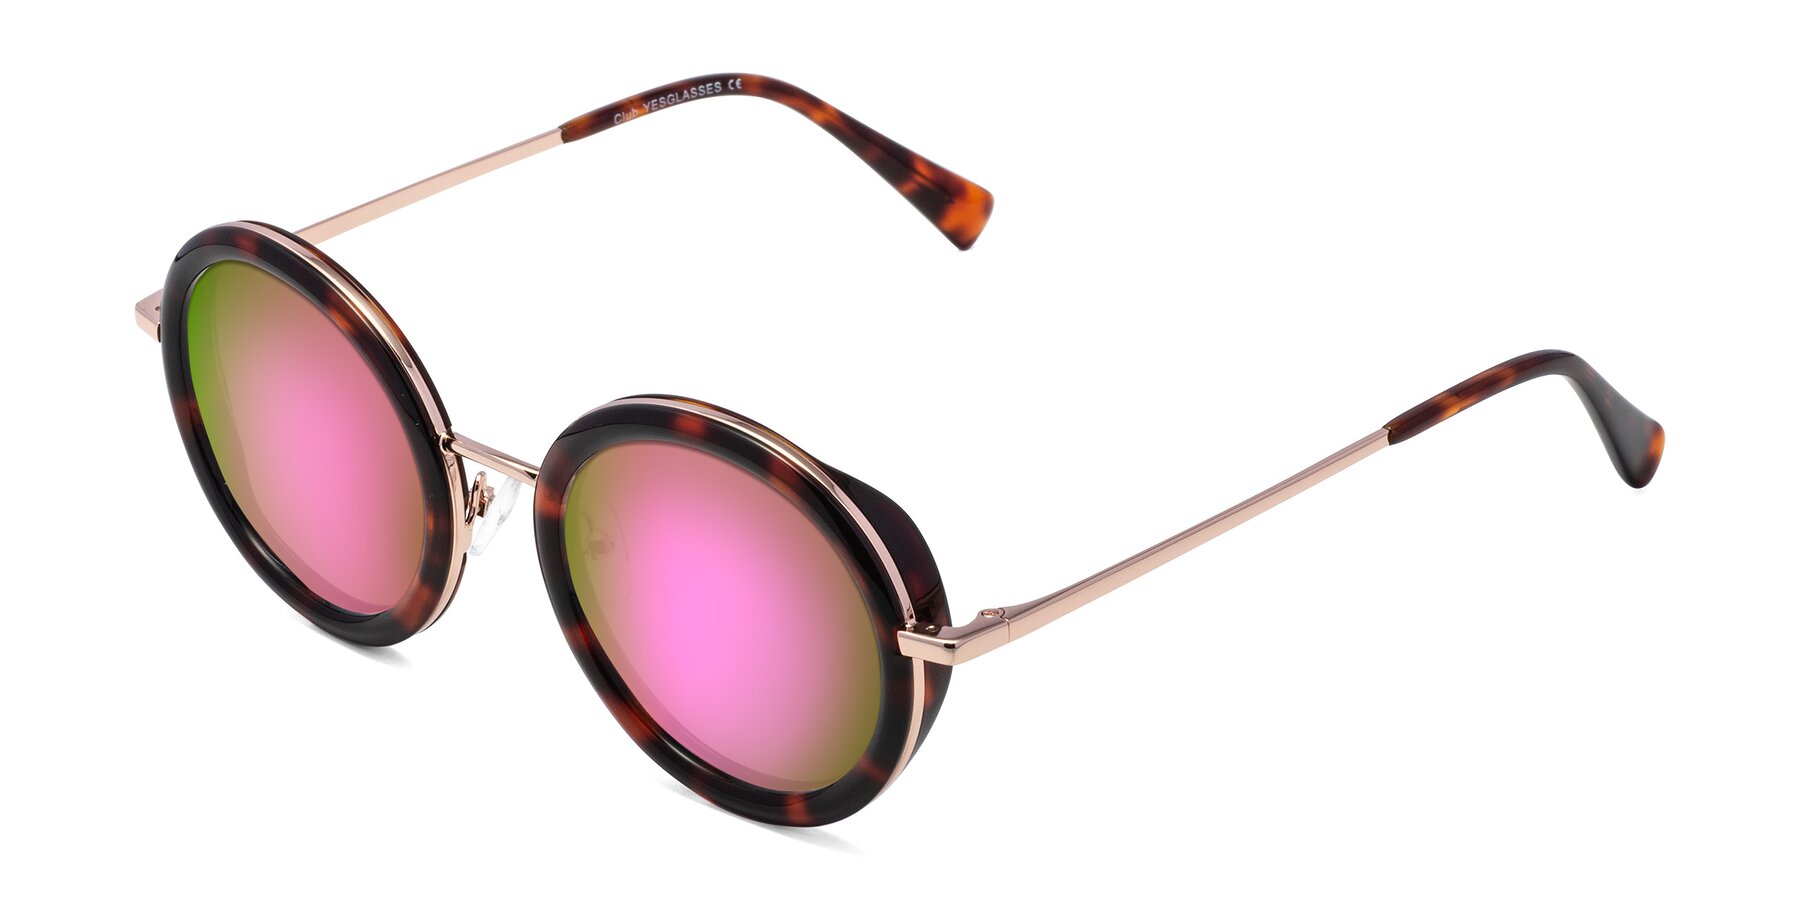 Angle of Club in Tortoise-Rose Gold with Pink Mirrored Lenses